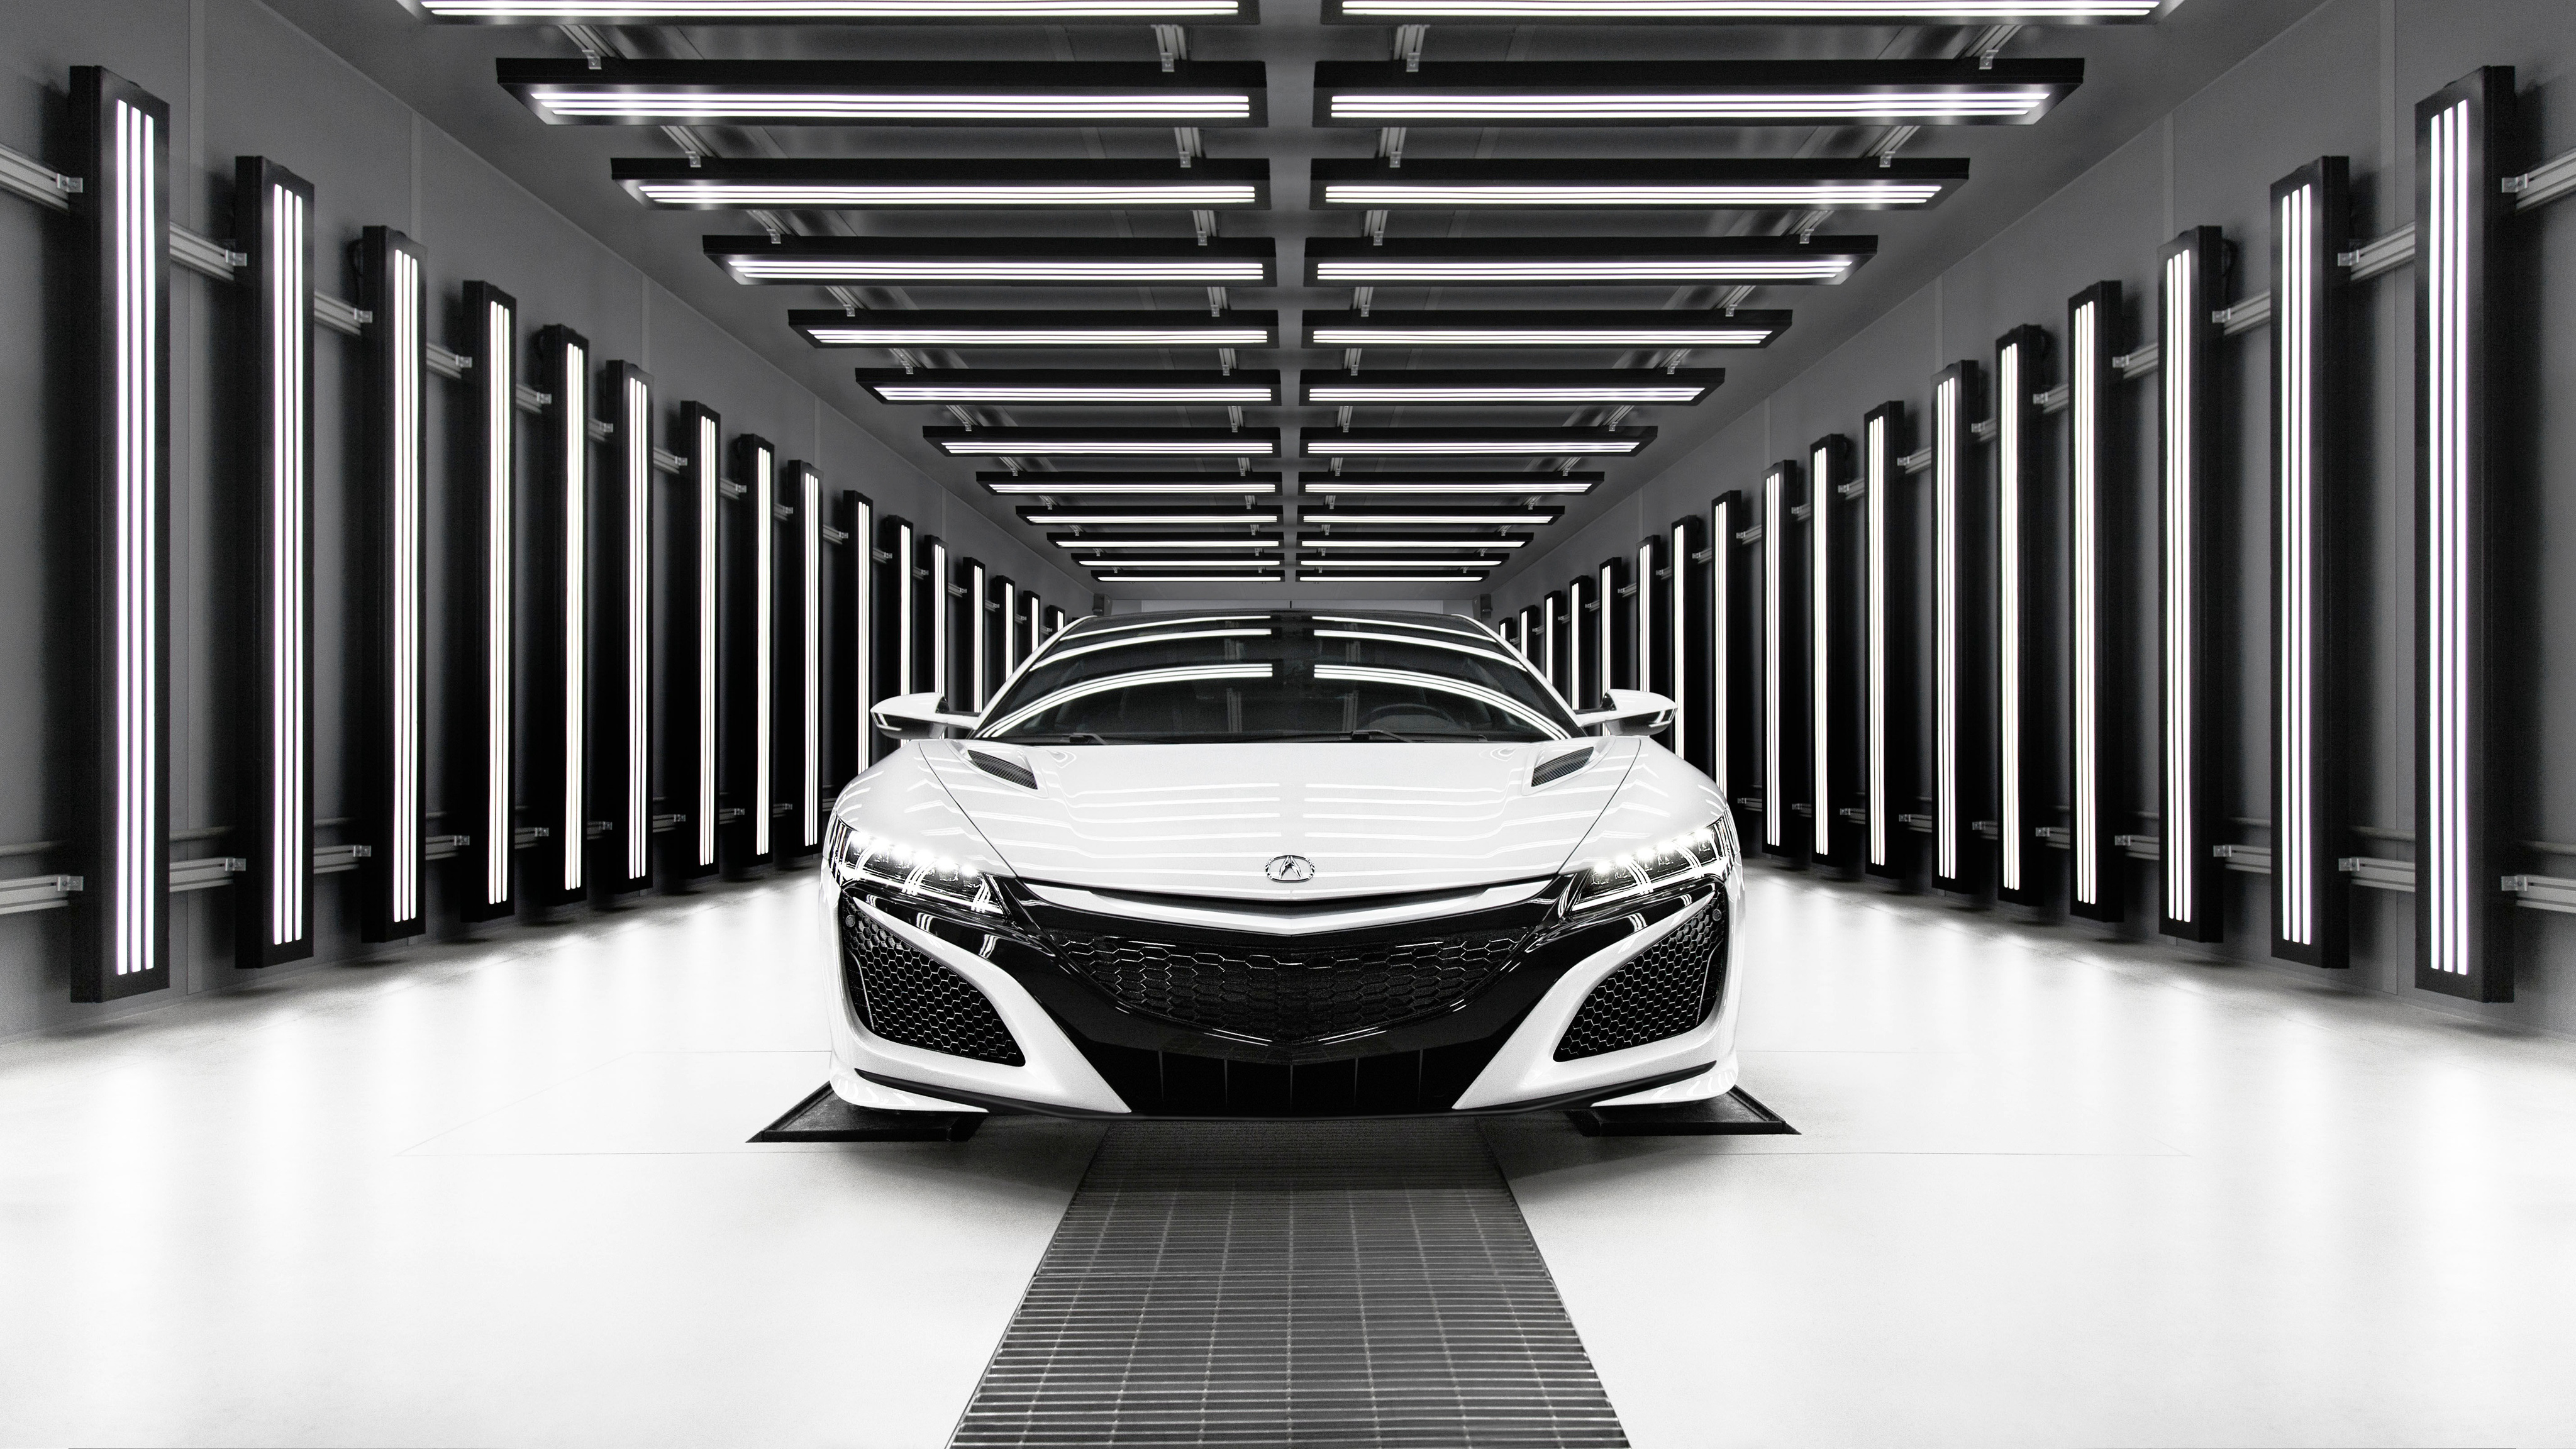 2019 Acura NSX 4K Wallpapers